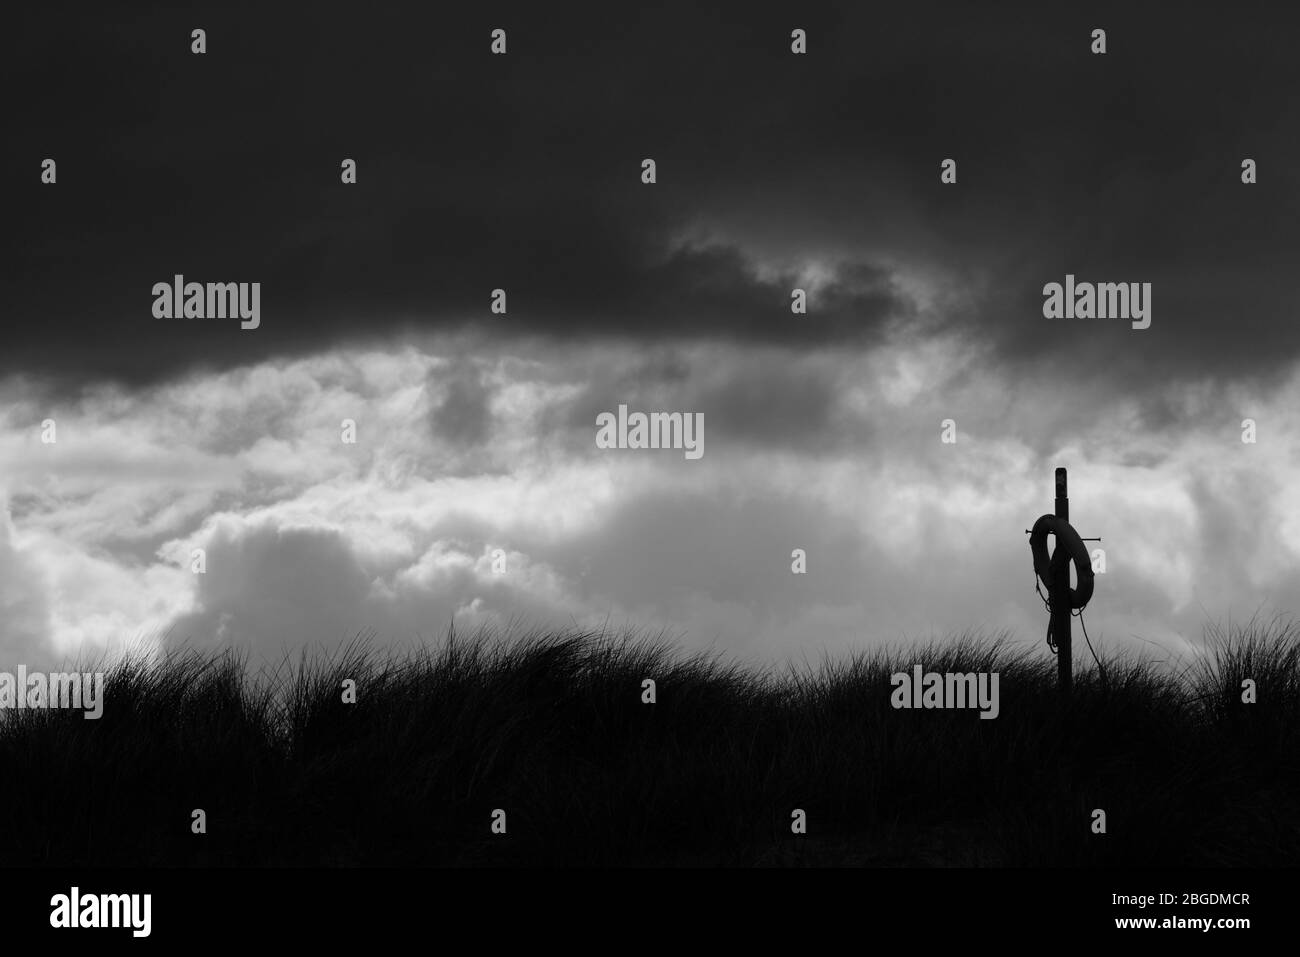 Monochrome image of life saving buoy on easy access post on top of coastal sand dune in silhouette and with stormy sky behind Stock Photo